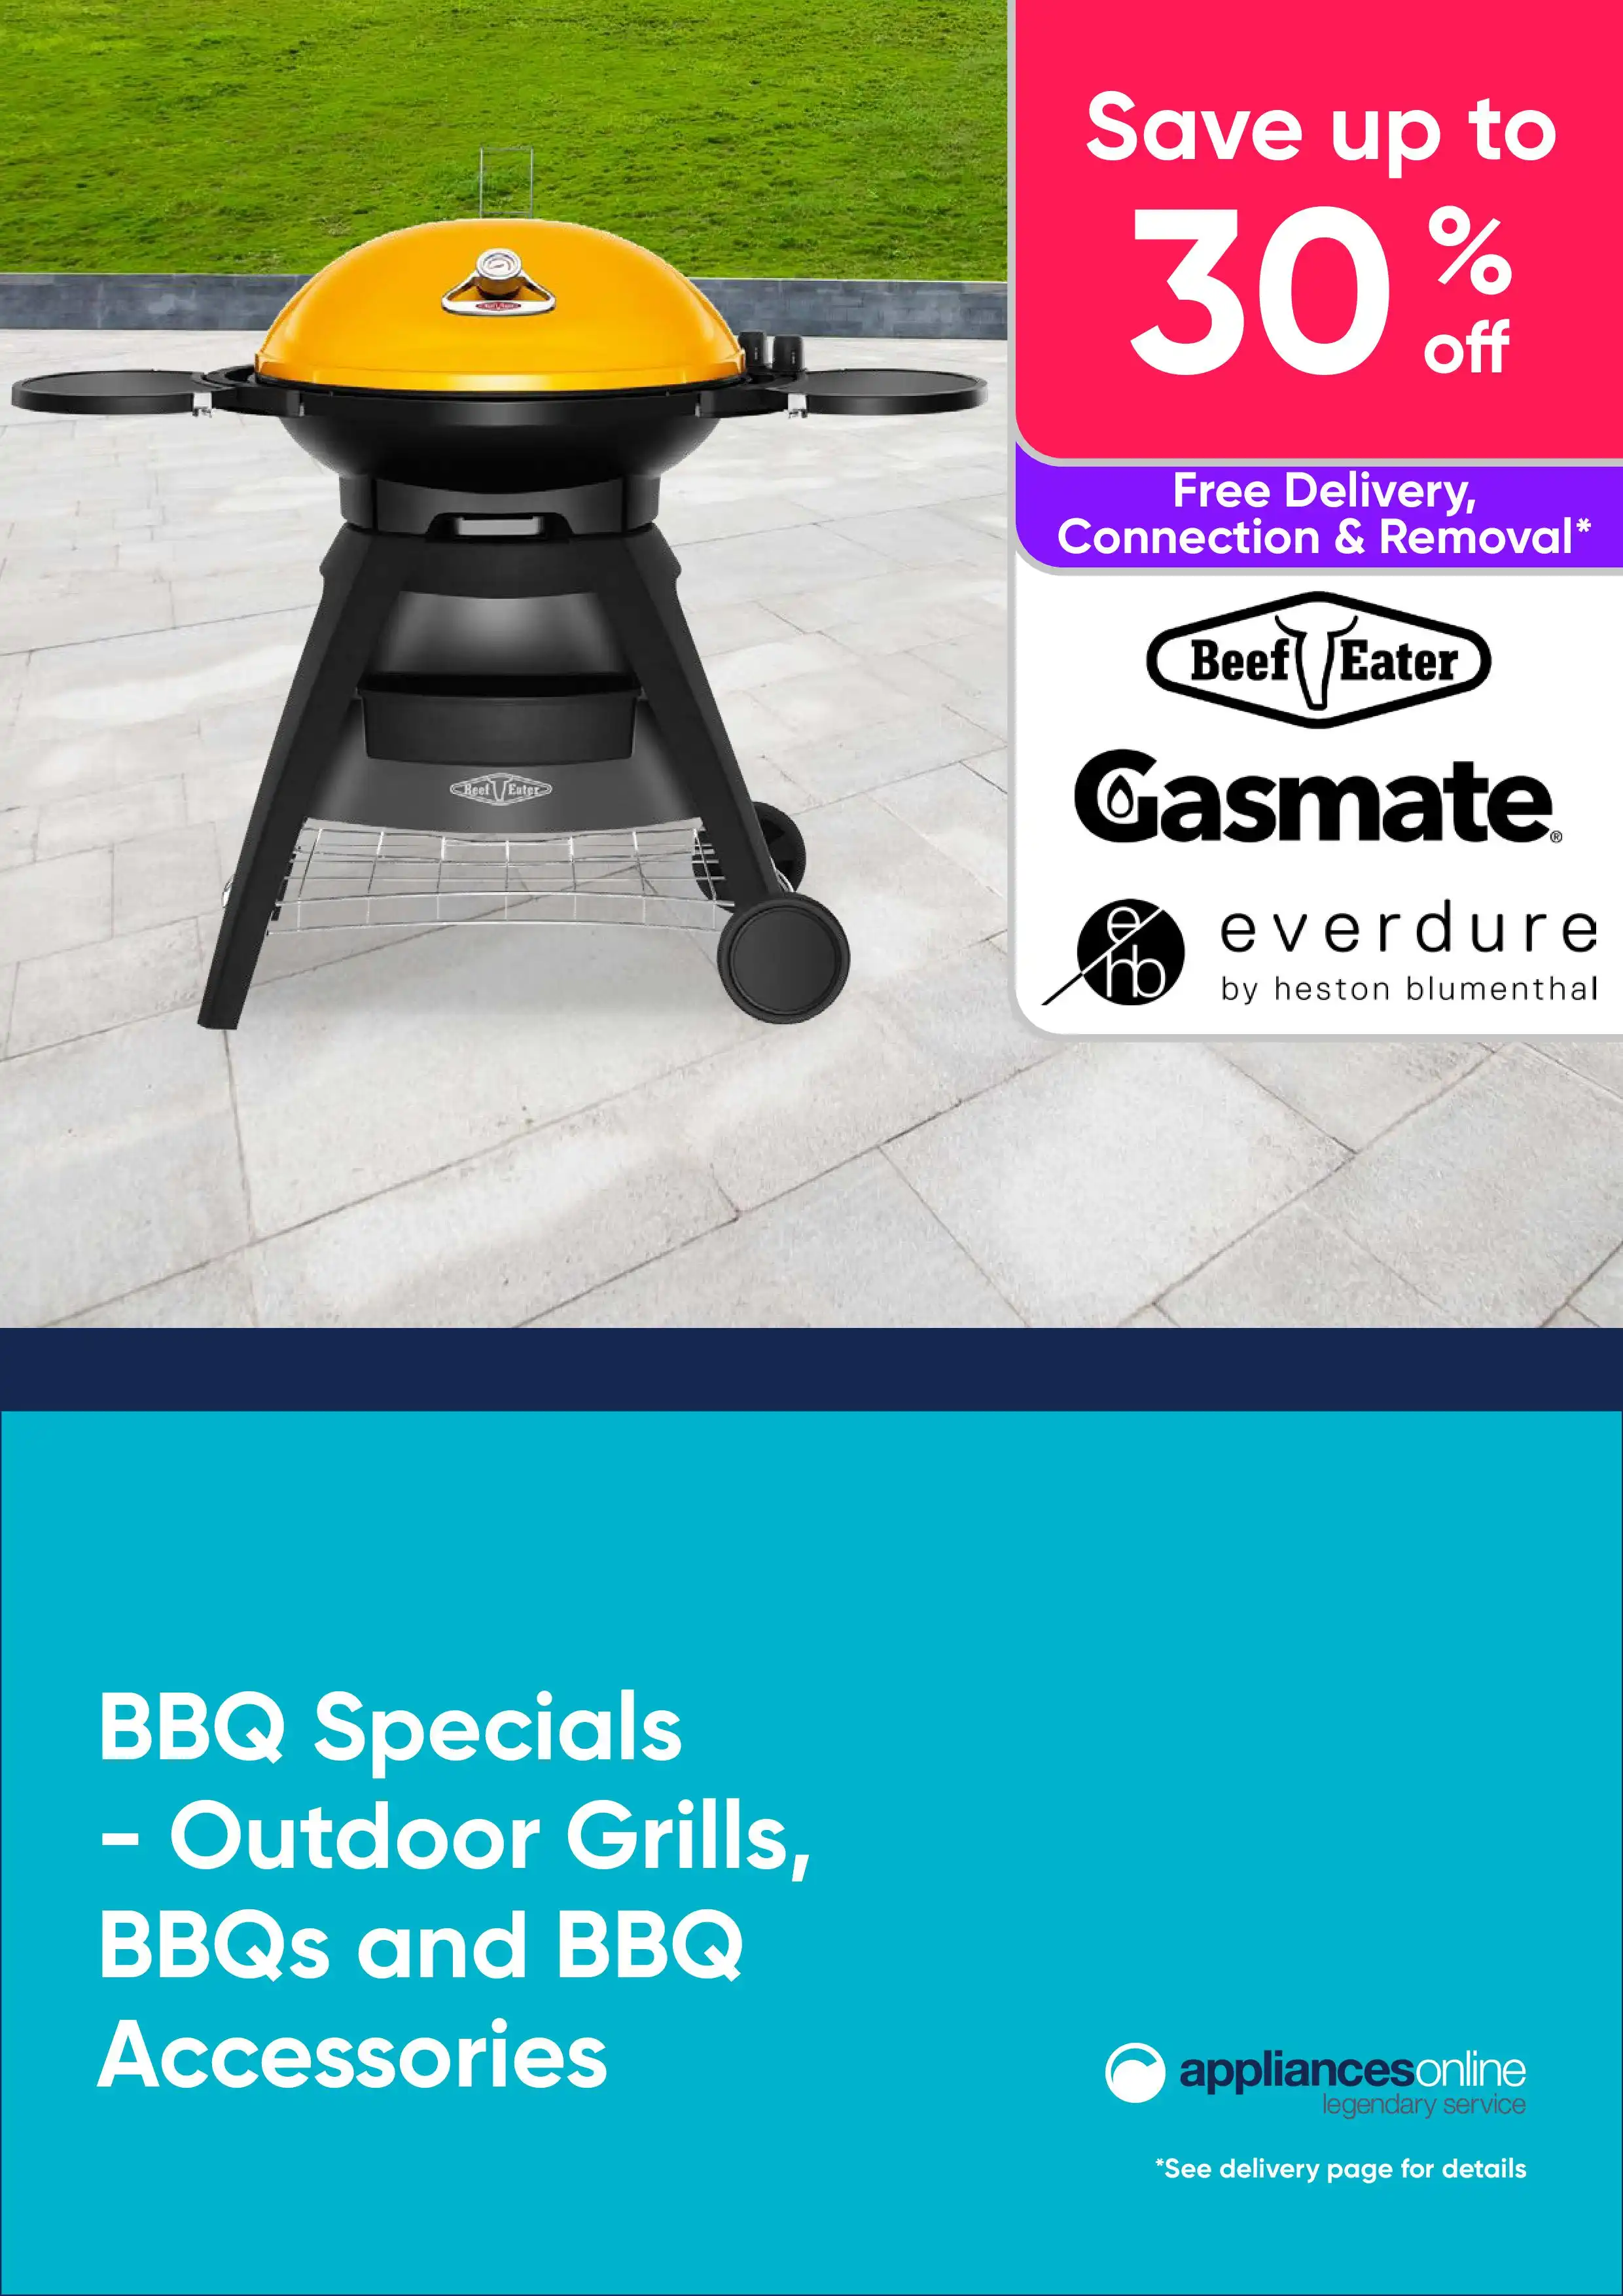 Appliances Online BBQ Specials - Save Up To 30% RRP On Outdoor Grills, BBQs and BBQ Accessories